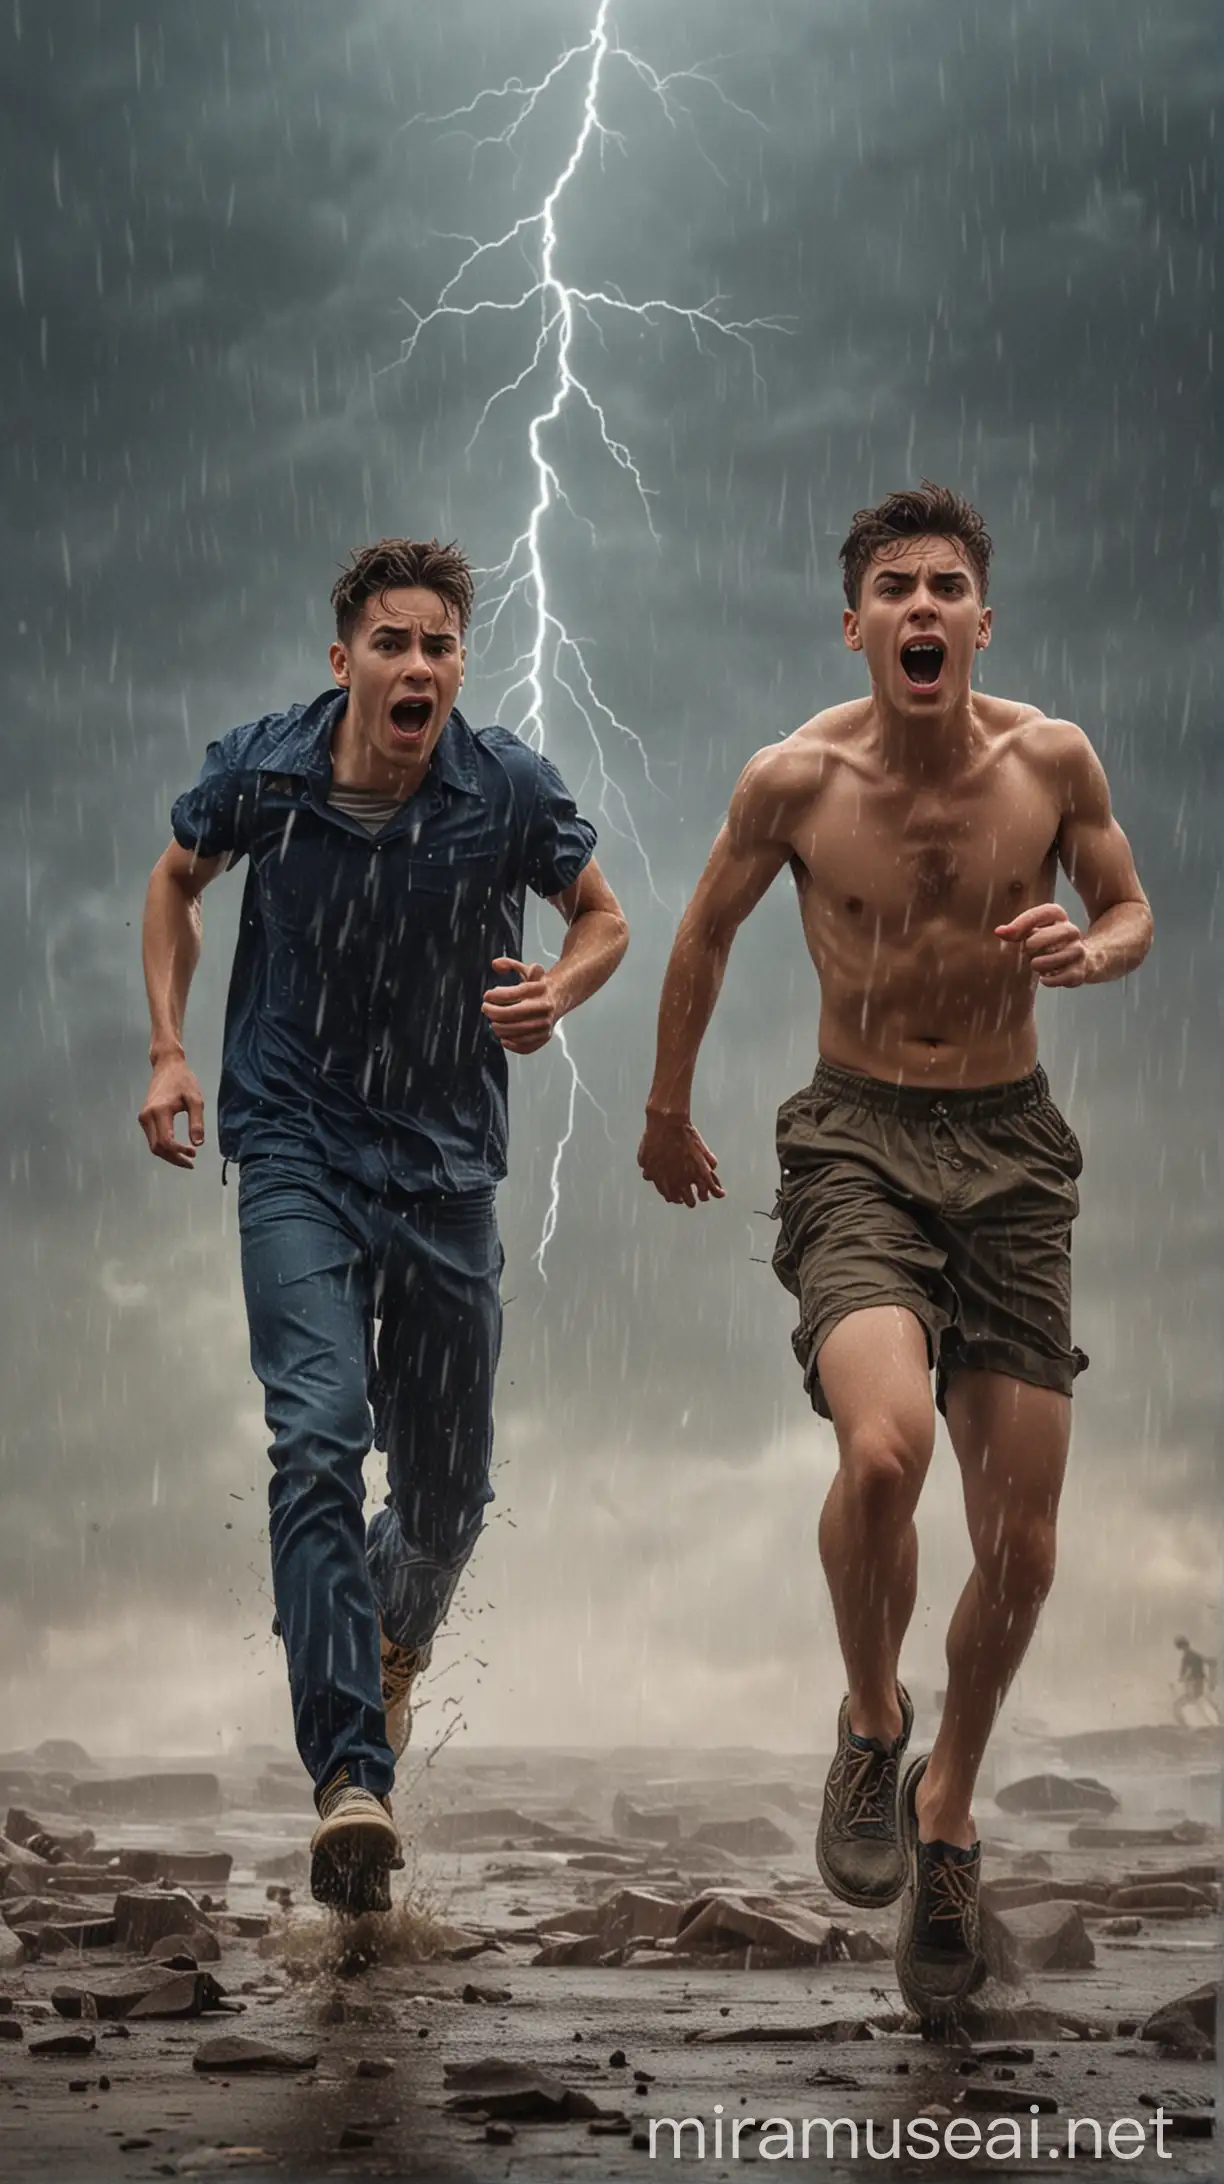 Panicked Young Gay Couple Fleeing Storm and Thunder